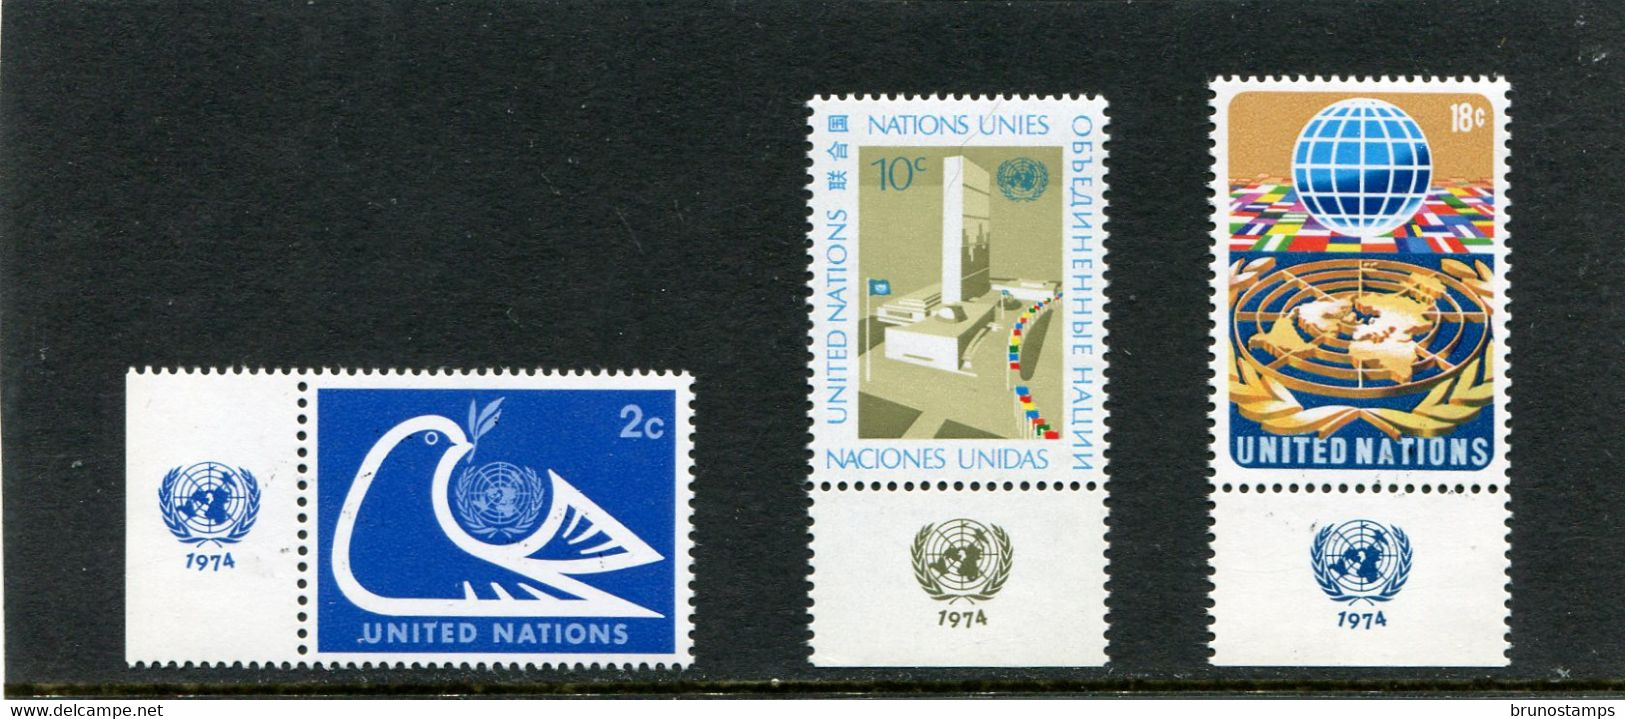 UNITED NATIONS - NEW YORK   - 1974  DEFINITIVE   SET  WITH TABS  MINT NH - Neufs